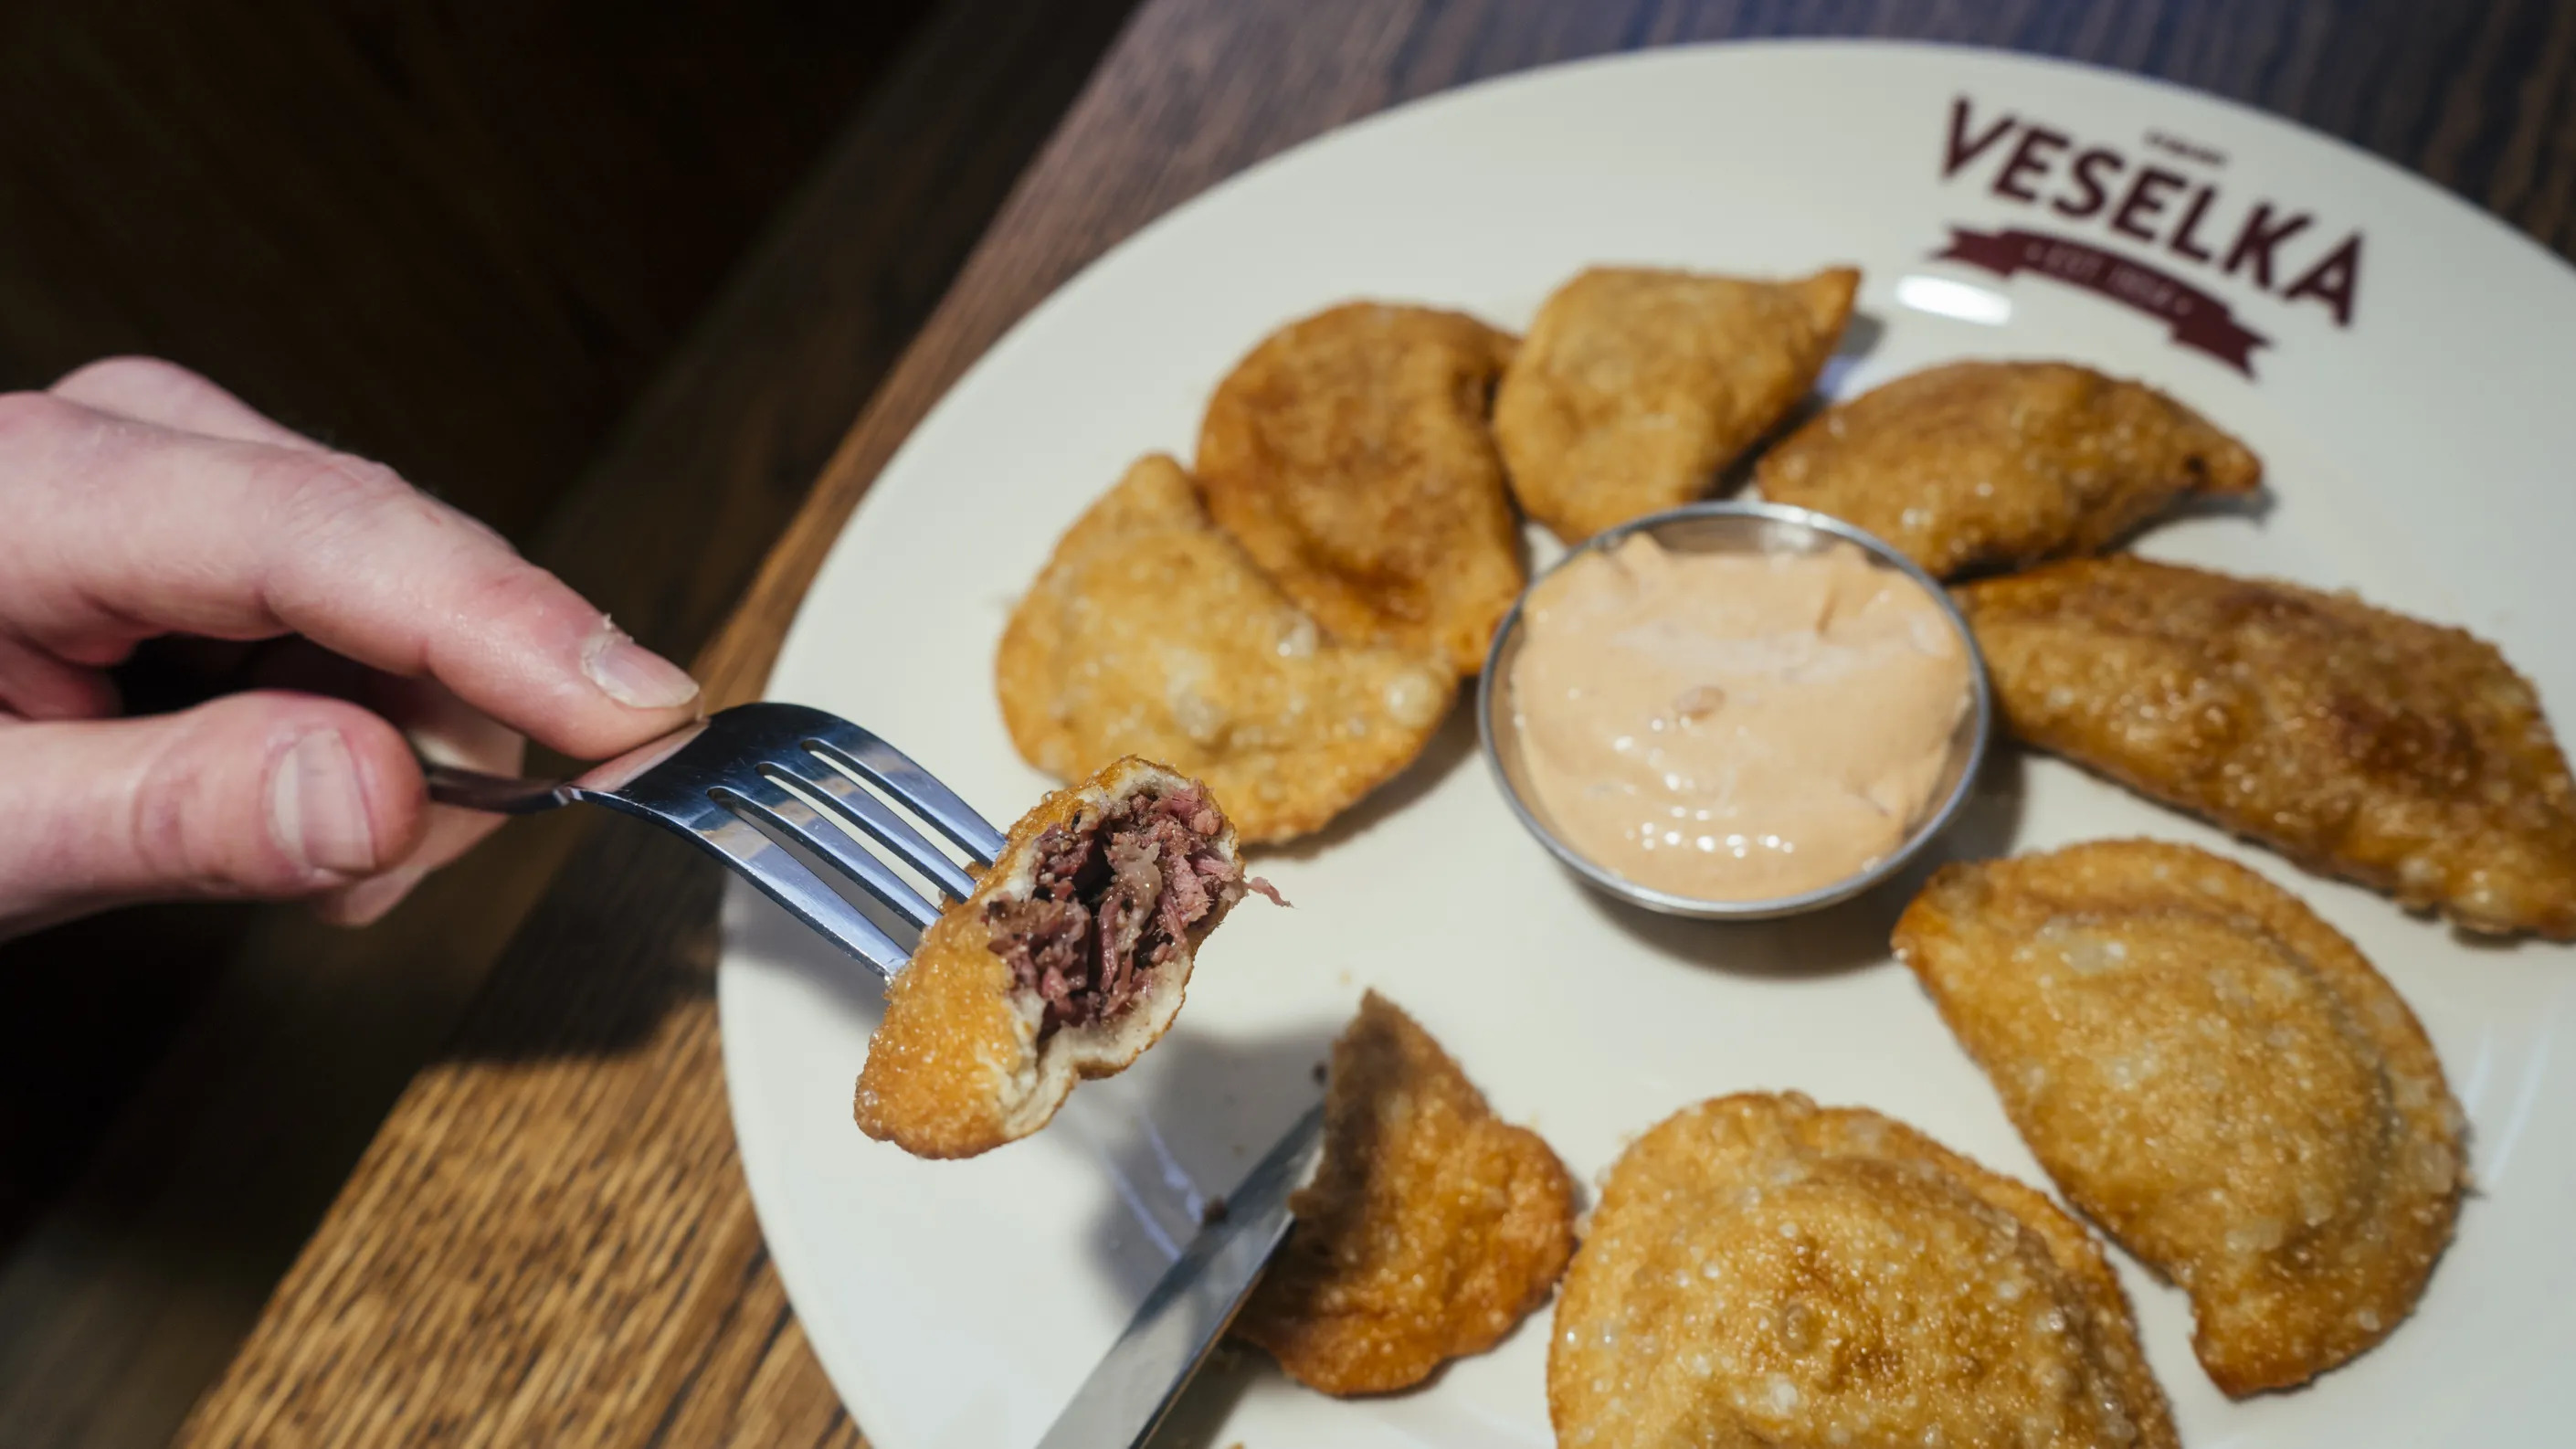 A plate of fried pierogies with pastrami at Veselka.